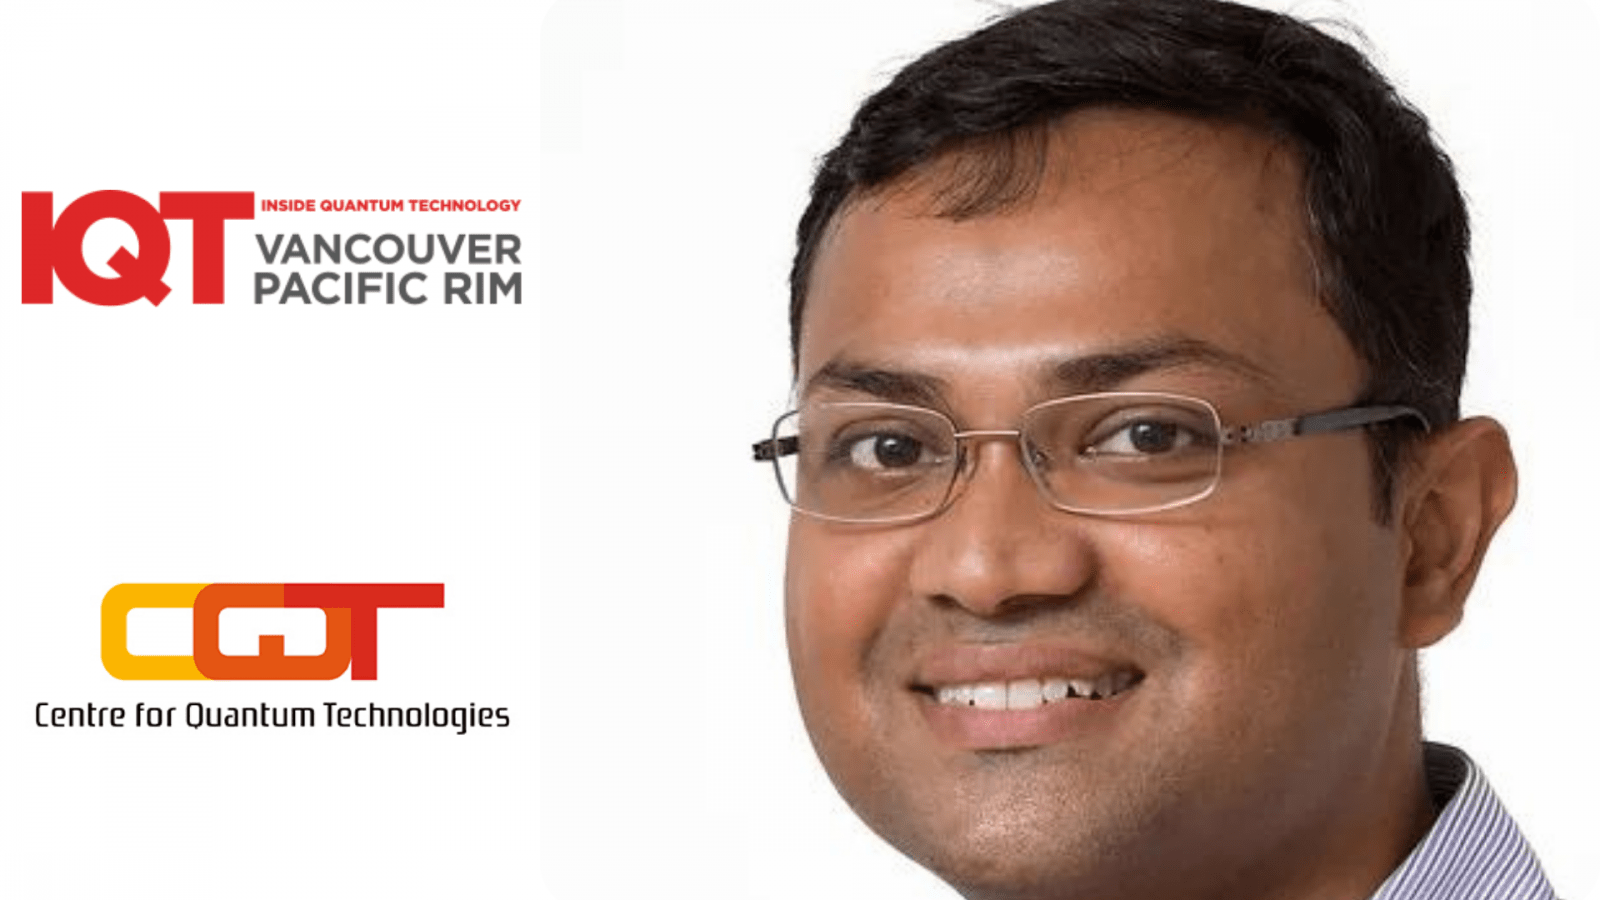 Manas Mukherjee, Director for National Quantum Fabless Foundry and PI for Centre for Quantum Technologies (CQT), is an IQT Vancouver/Pacific Rim 2024 Conference Speaker